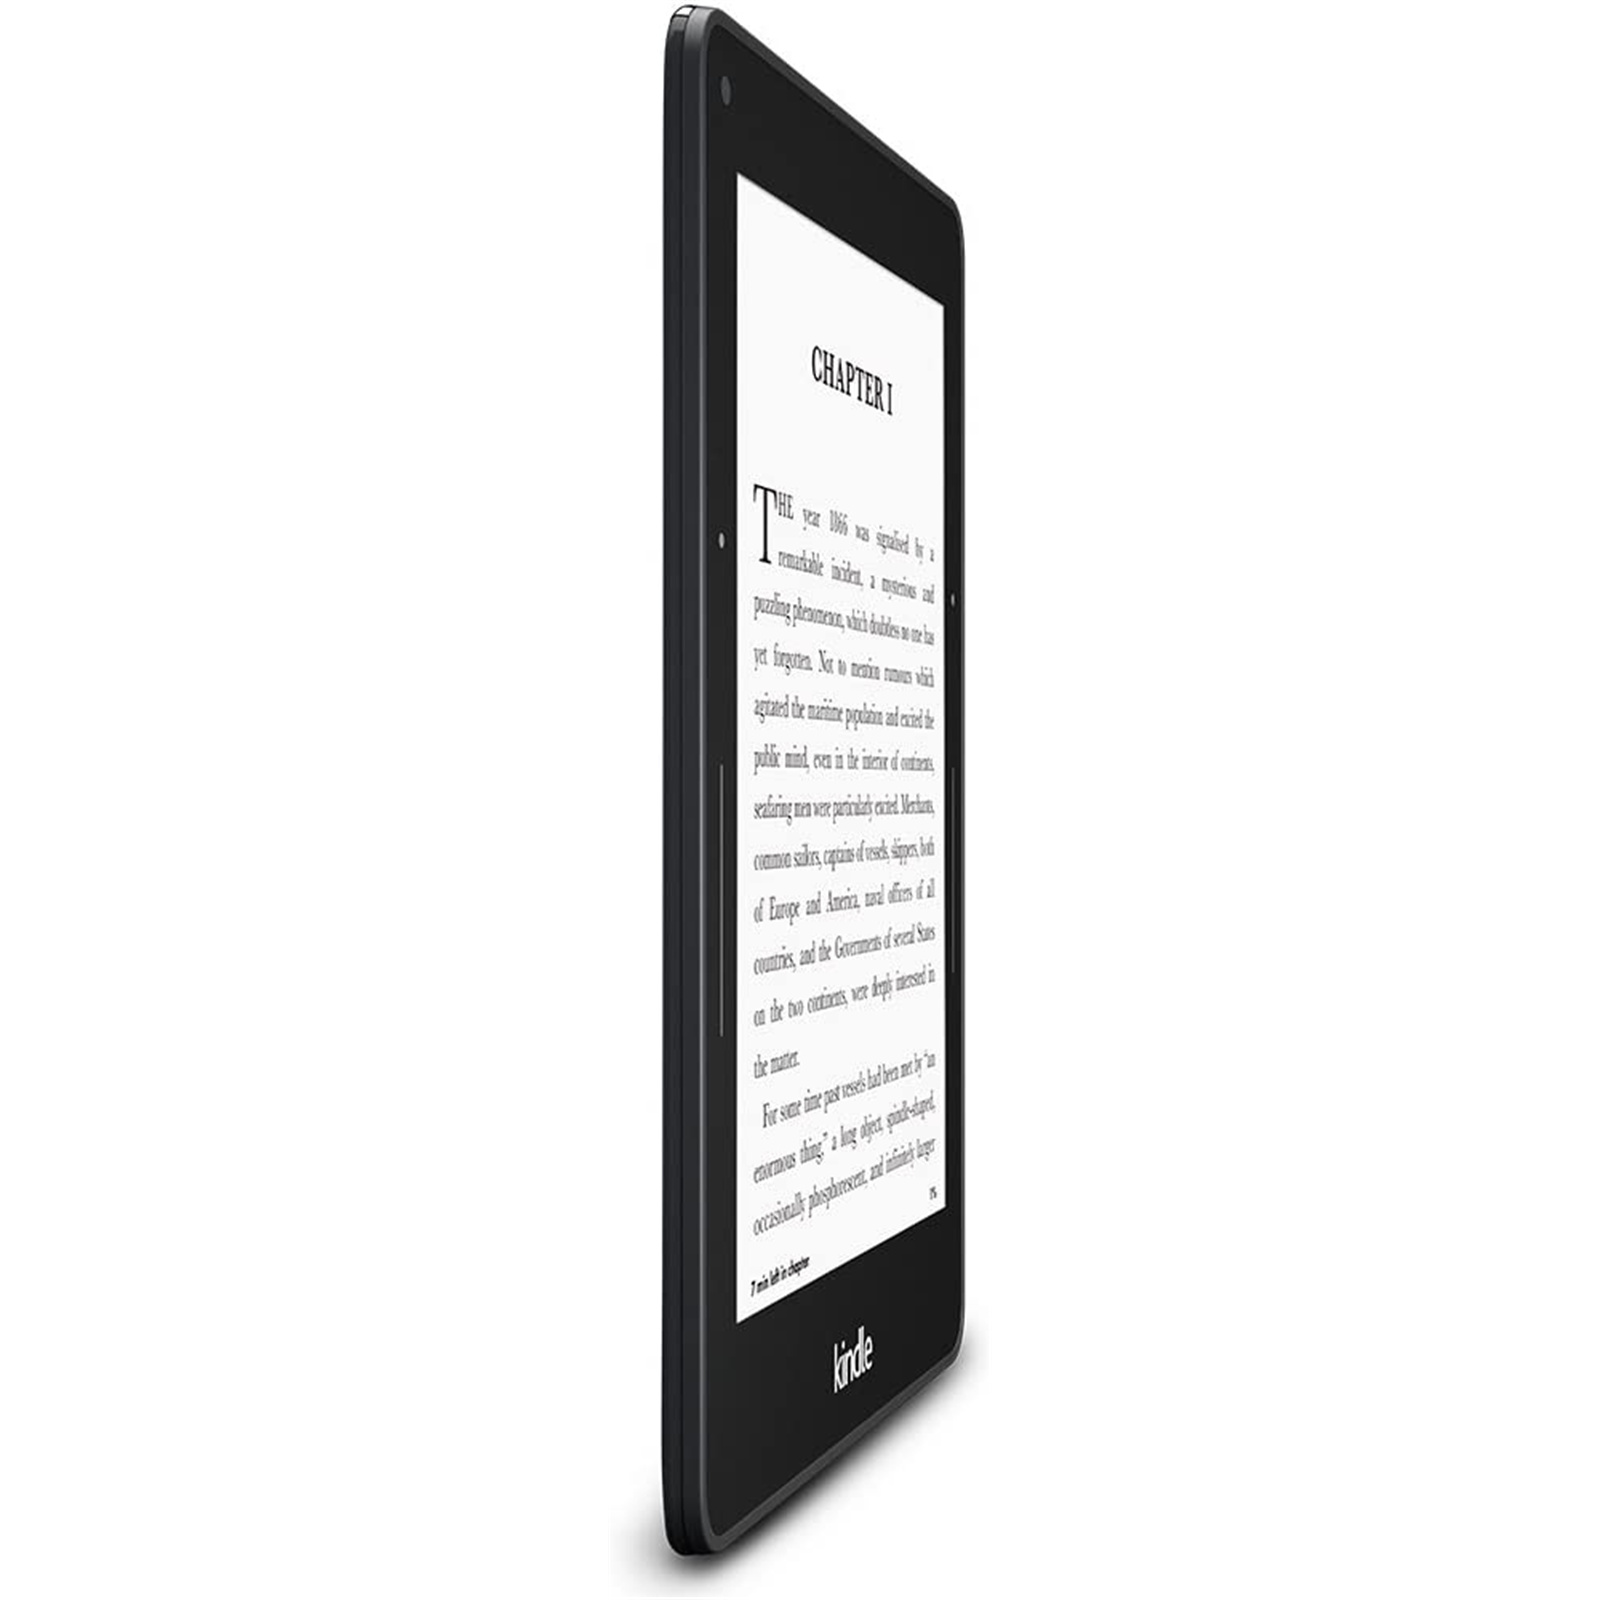 6 High-Resolution Display Wi-Fi Kindle Voyage E-reader Free Cellular Connectivity with Adaptive Built-in Light PagePress Sensors 300 ppi 